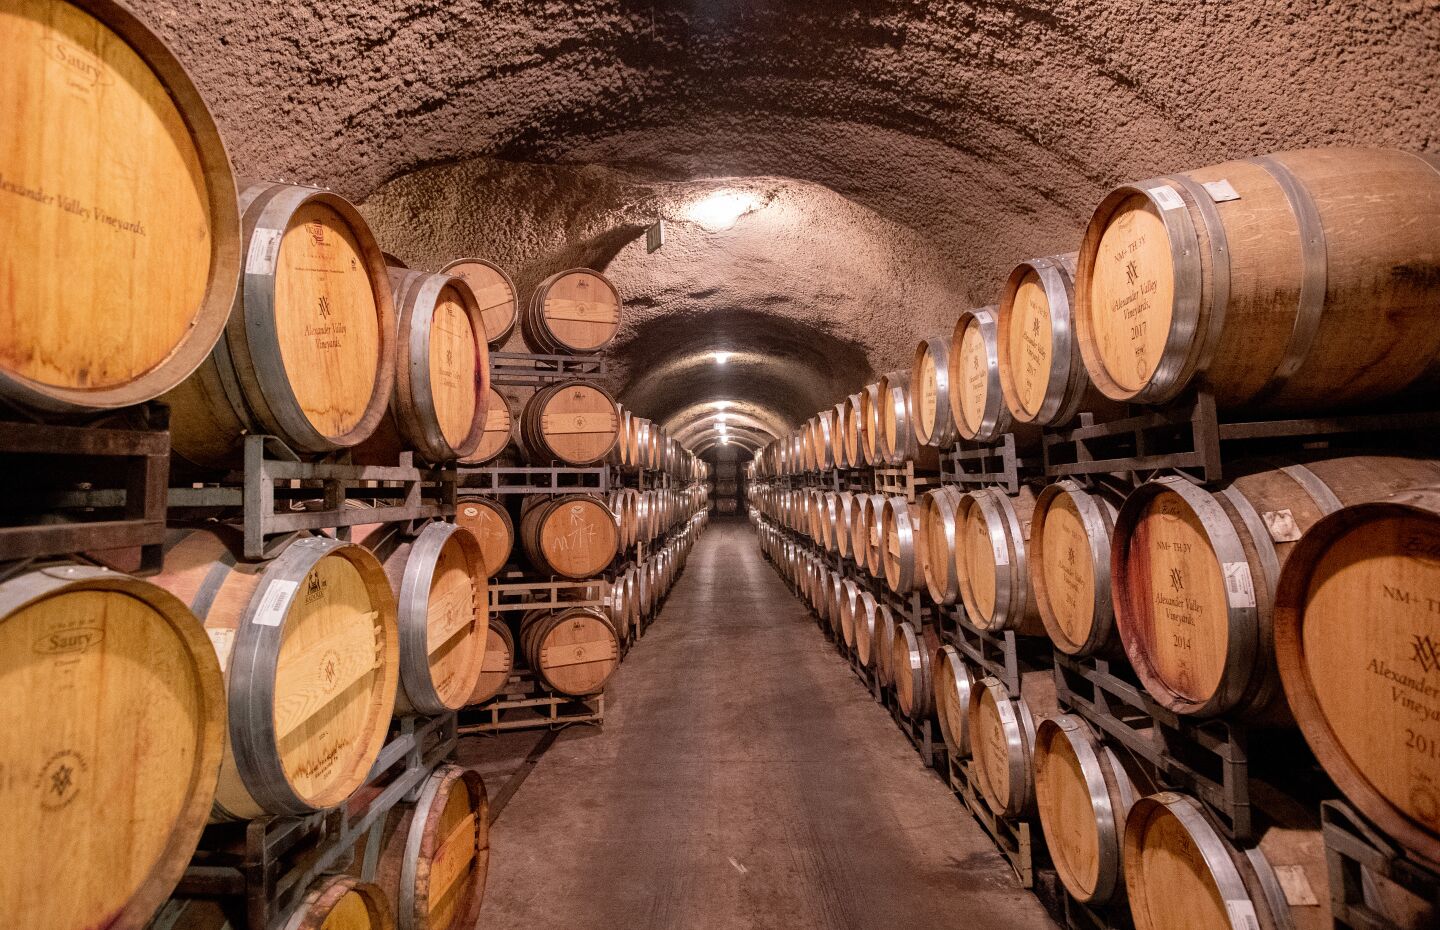 About 7,000 barrels of wine are stored in a cave at Alexander Valley Vineyards. California wineries face a 93% price increase because of taxes and retaliatory tariffs imposed by China amid the trade war.